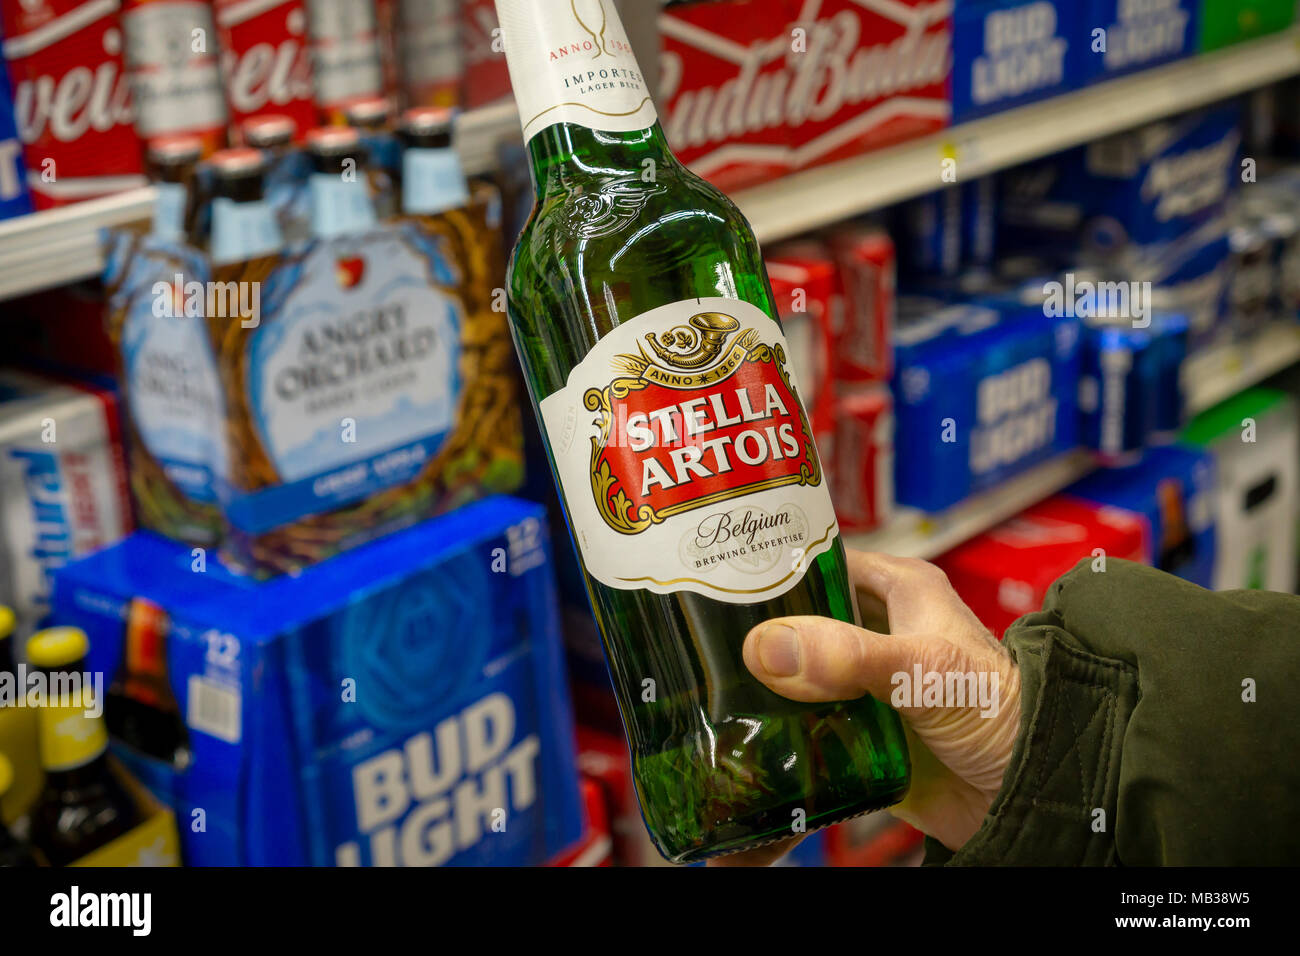 https://c8.alamy.com/comp/MB38W5/a-customer-chooses-a-bottle-of-stella-artois-beer-in-a-supermarket-cooler-in-new-york-on-tuesday-april-3-2018-stella-artois-recently-recalled-some-of-its-112-ounce-bottles-because-of-the-possibility-that-they-might-contain-small-pieces-of-glass-stella-artois-is-a-brand-of-the-mega-brewer-anheuser-busch-inbev-sa-richard-b-levine-MB38W5.jpg